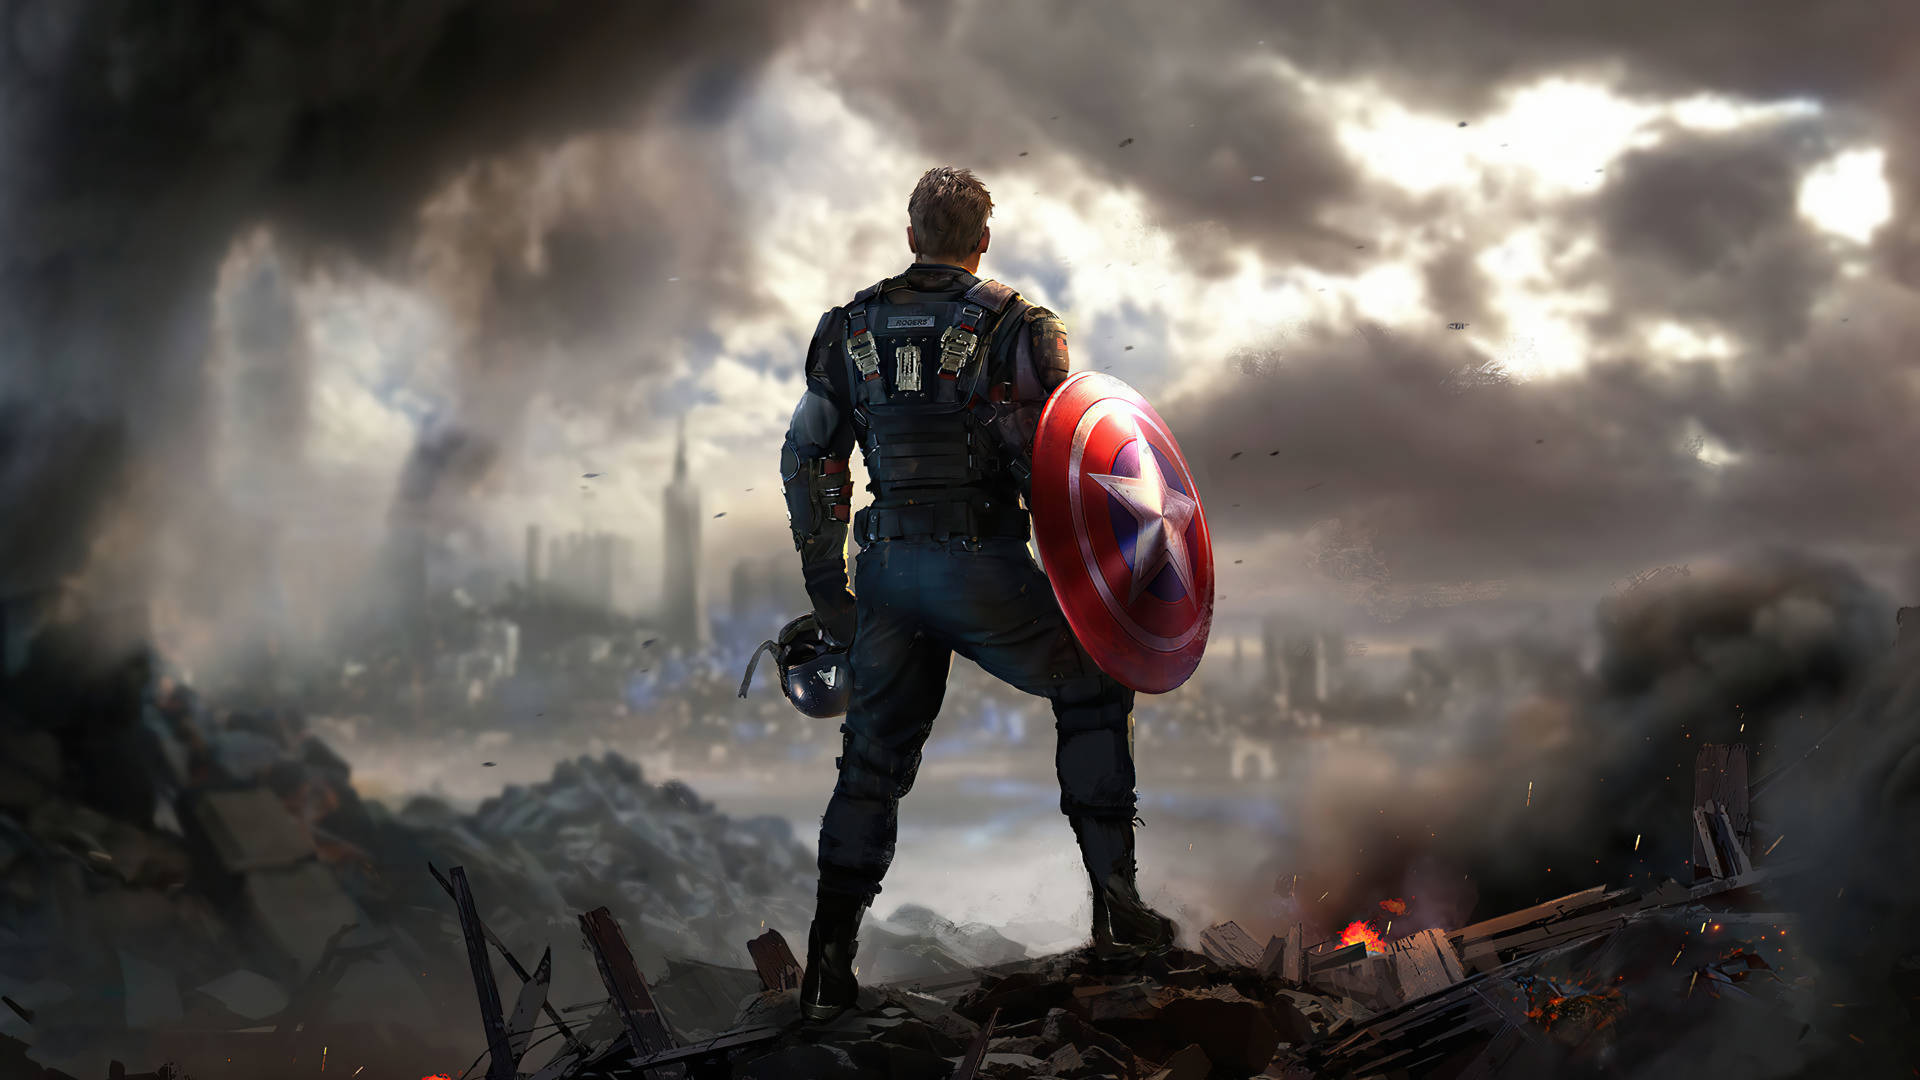 Free Avengers Wallpaper Downloads, [400+] Avengers Wallpapers for FREE |  